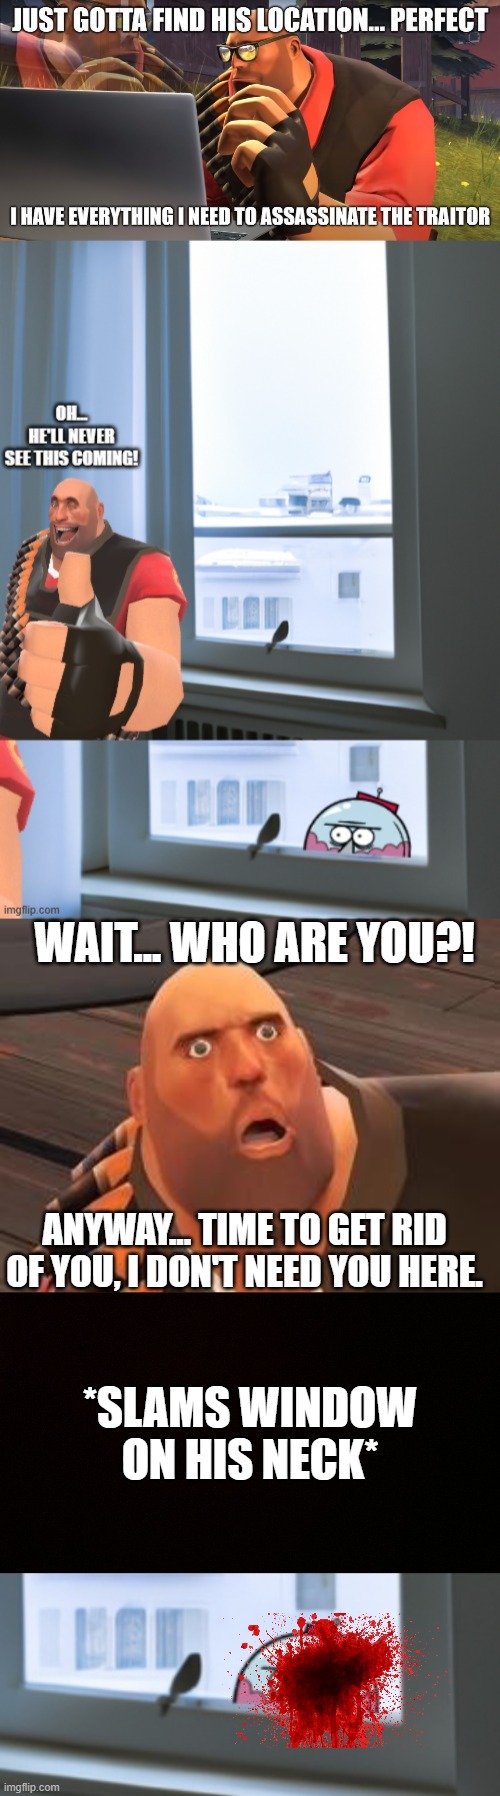 Heavy is fluent in over 1 billion forms of killing people. | WAIT... WHO ARE YOU?! ANYWAY... TIME TO GET RID OF YOU, I DON'T NEED YOU HERE. *SLAMS WINDOW ON HIS NECK* | image tagged in tf2 heavy,blank censor | made w/ Imgflip meme maker